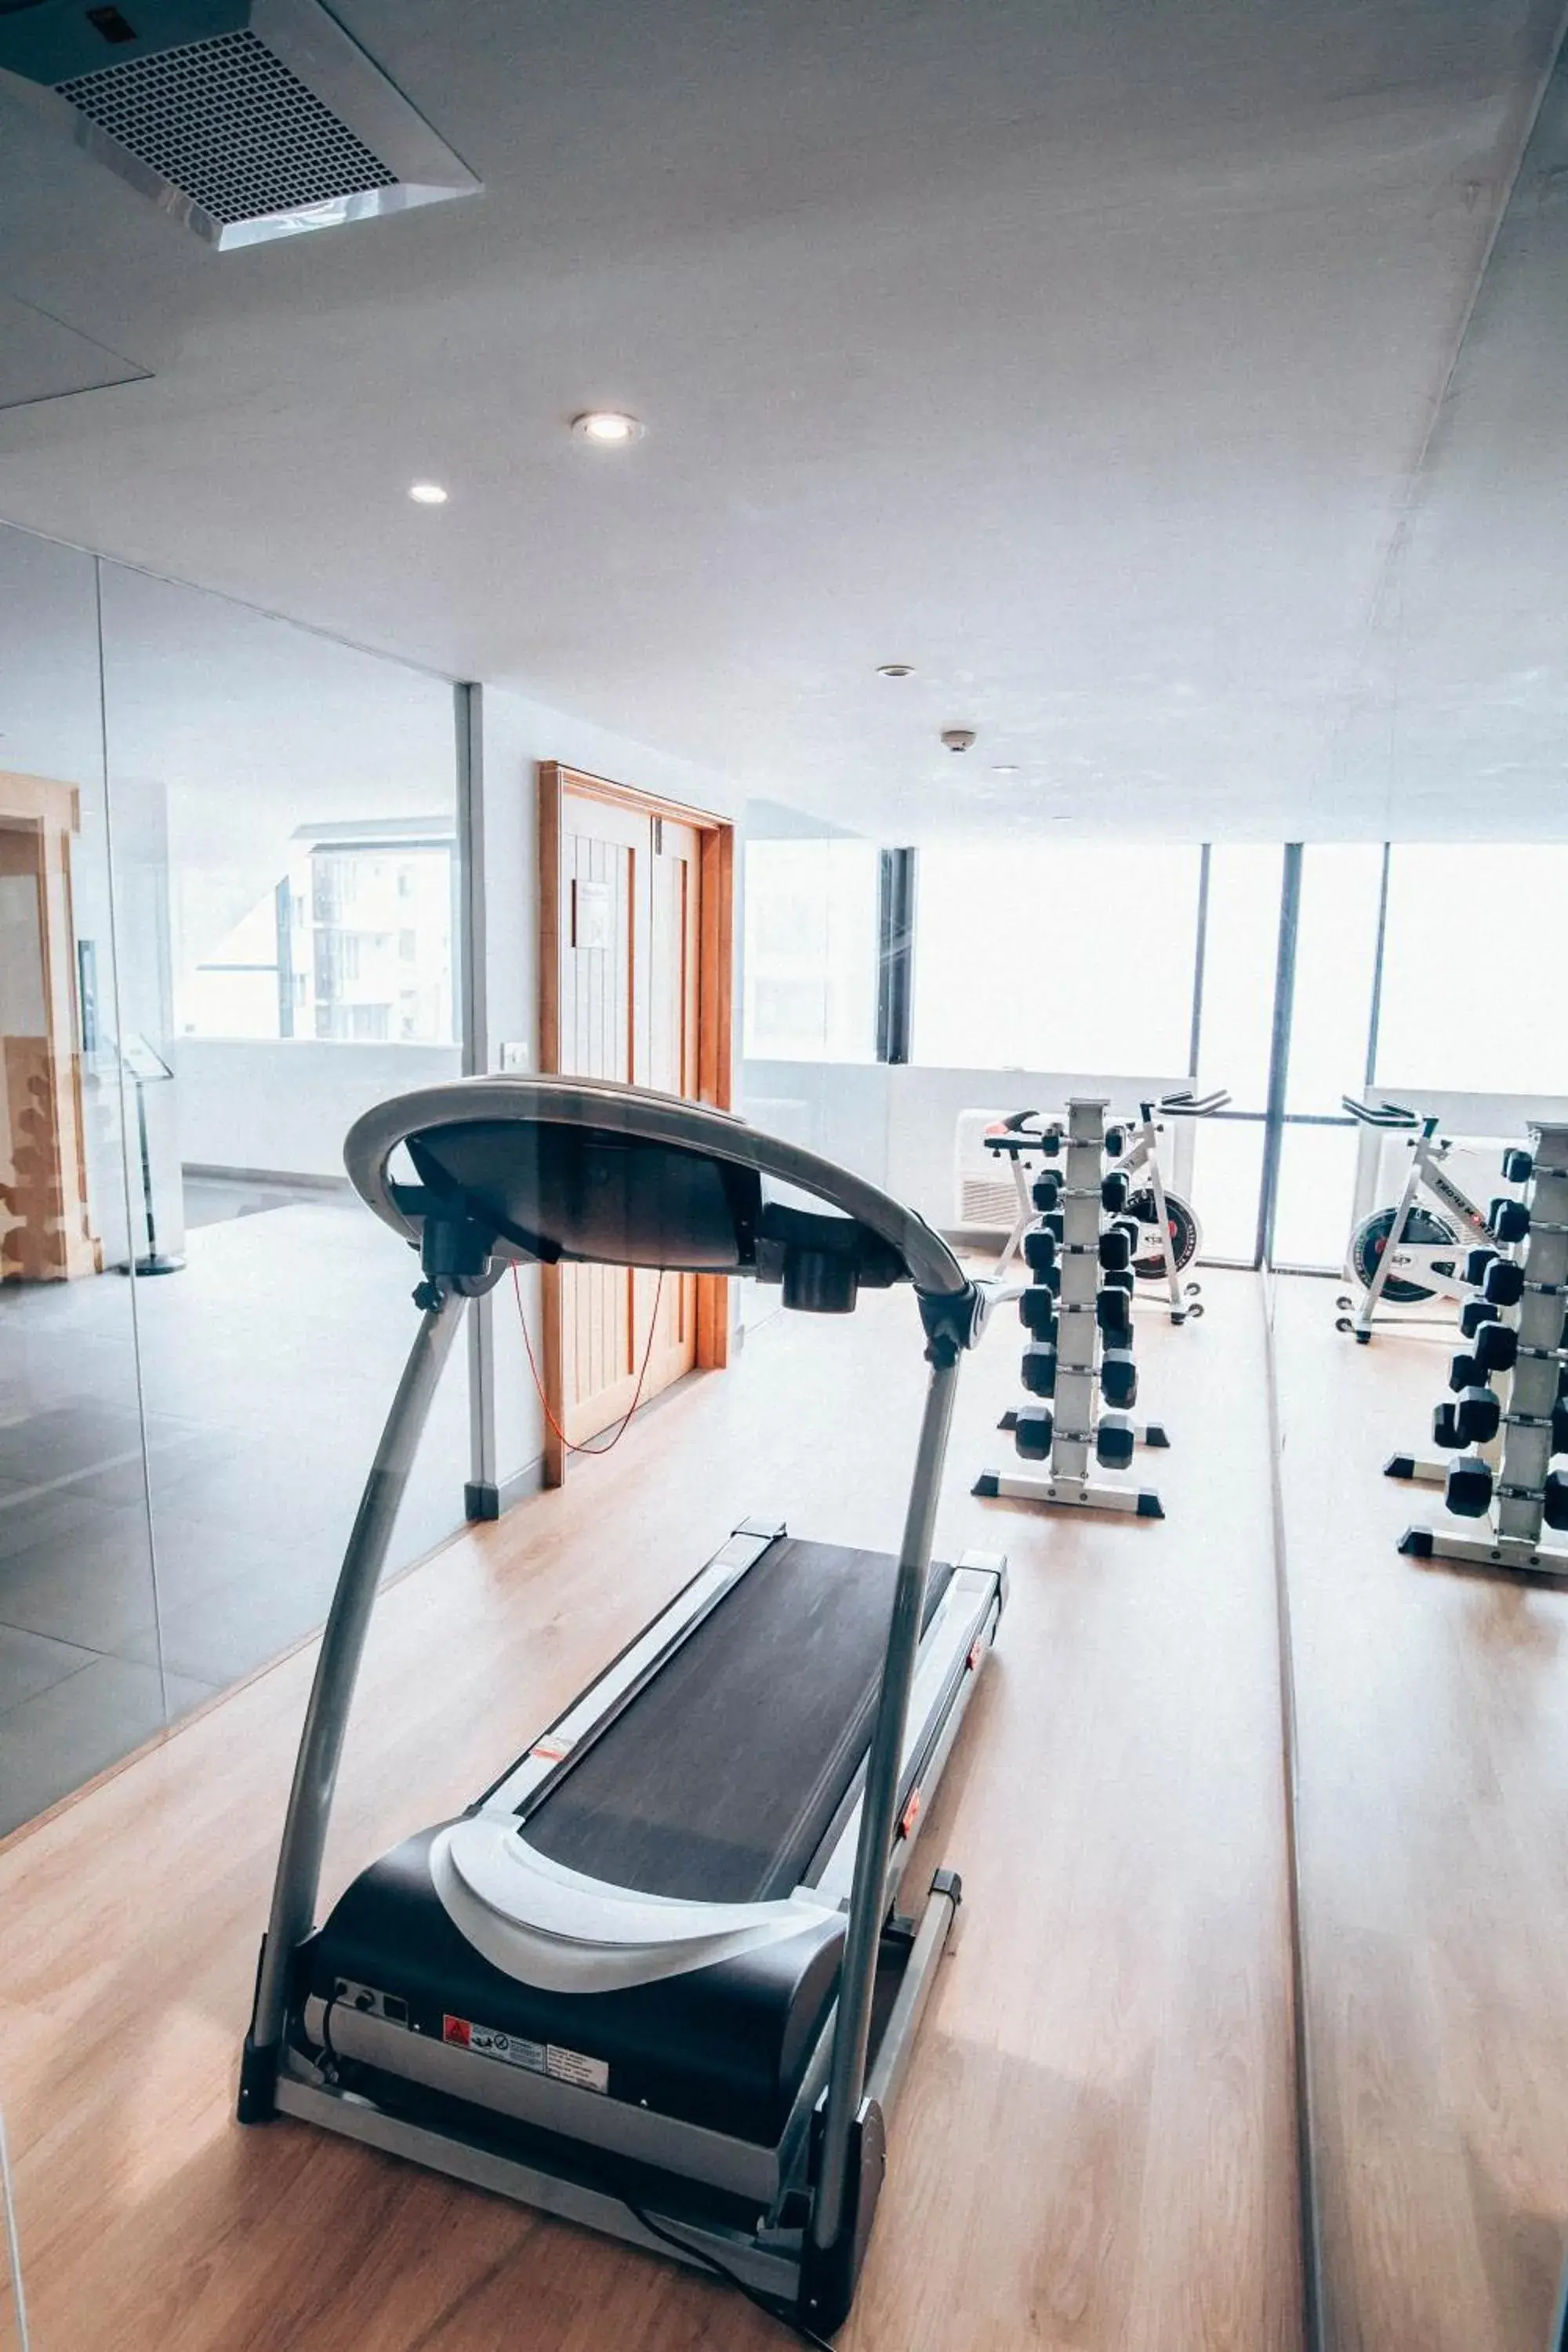 Fitness centre/facilities, Fitness Center/Facilities in THEE Bangkok Hotel by TH District